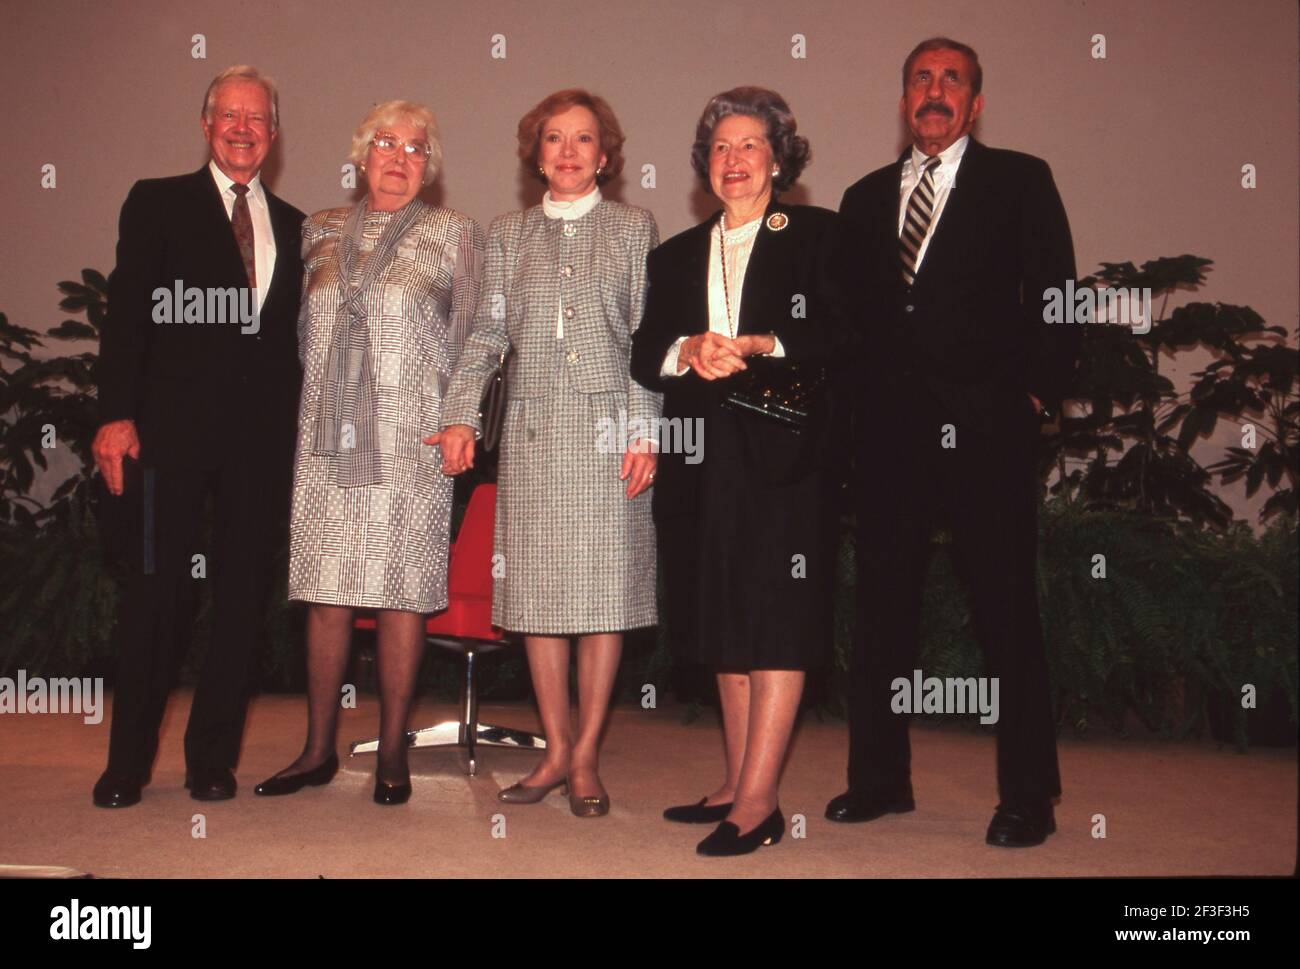 Austin, Texas, USA. 16th Mar, 2021. Retrospective on the life of former First Lady, LADY BIRD JOHNSON during her years in Texas after the death of former President Lyndon Baines Johnson on January 22, 1973. This photo shows left to right, Jimmy Carter, unidentified woman, Rosalyn Carter, LADY BIRD JOHNSON and Harry Middleton at the LBJ Library. Credit: Bob Daemmrich/ZUMA Wire/Alamy Live News Stock Photo